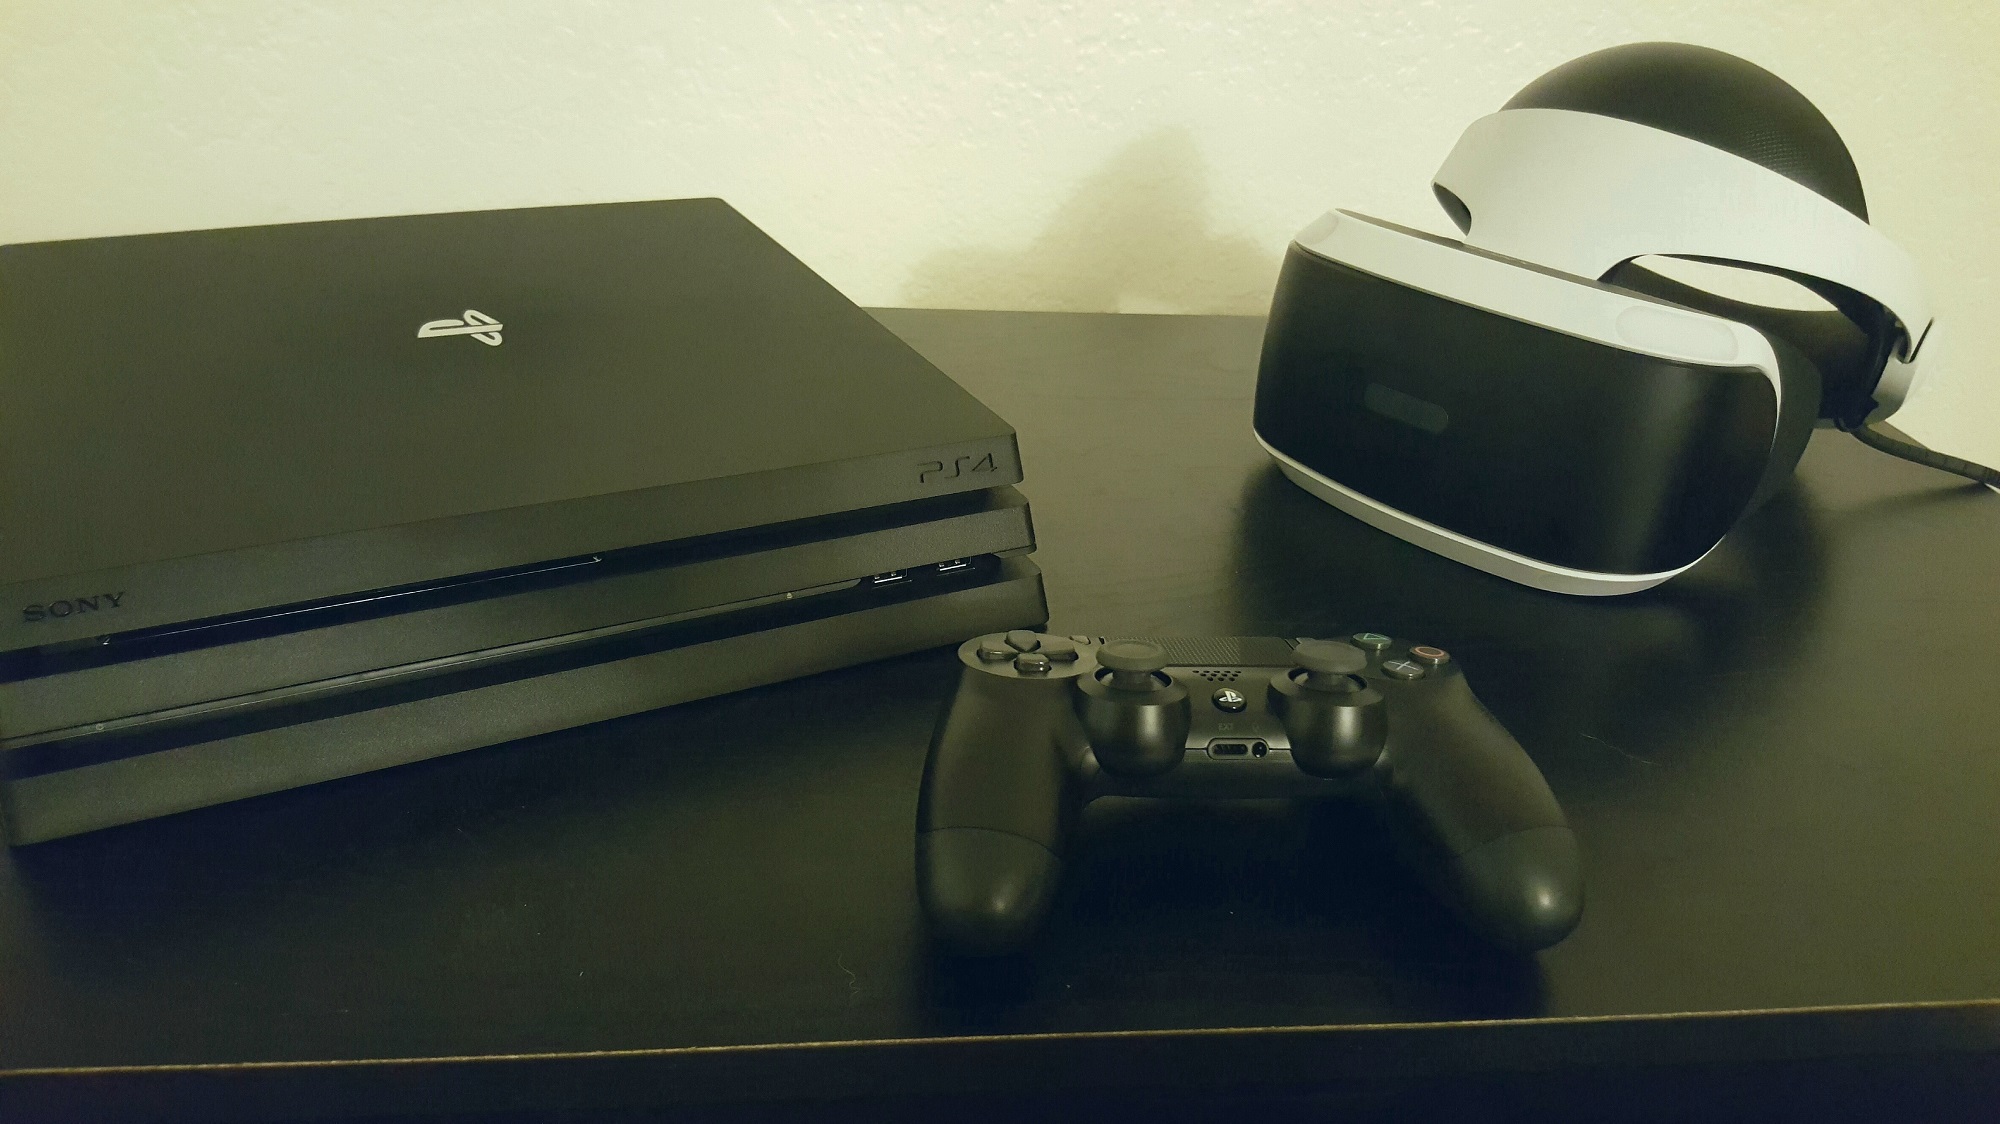 PlayStation 4 Pro Review: Does It Improve The PS VR Experience?